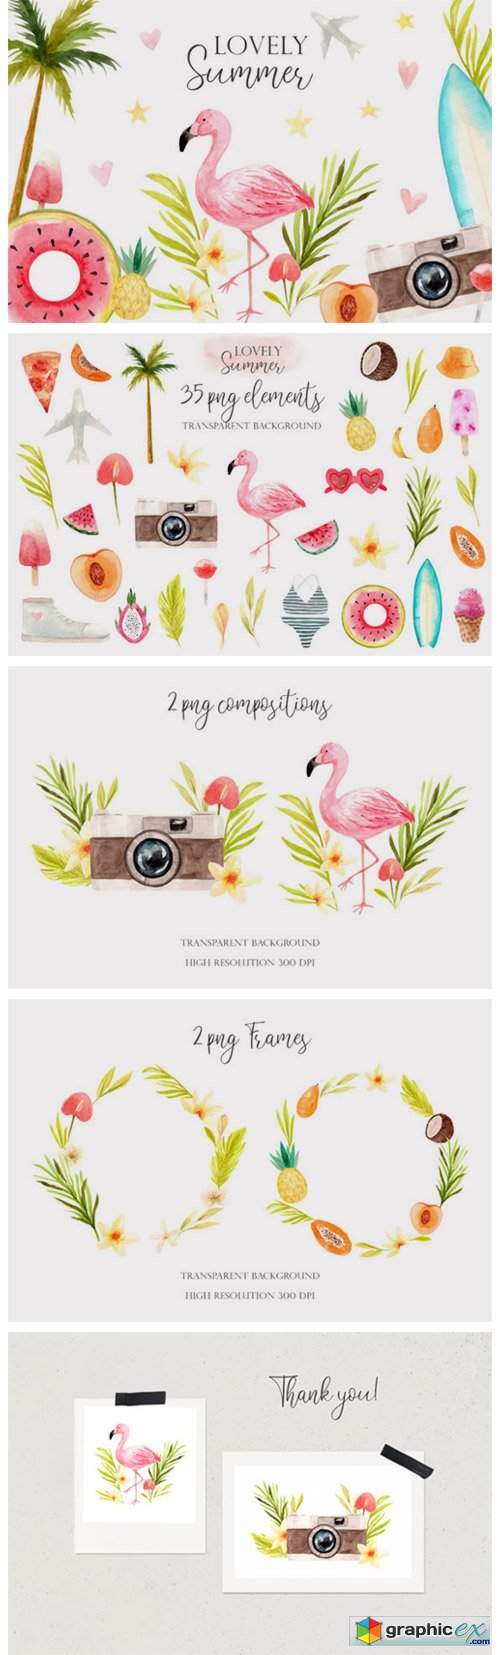 Watercolor "Lovely Summer" Clipart